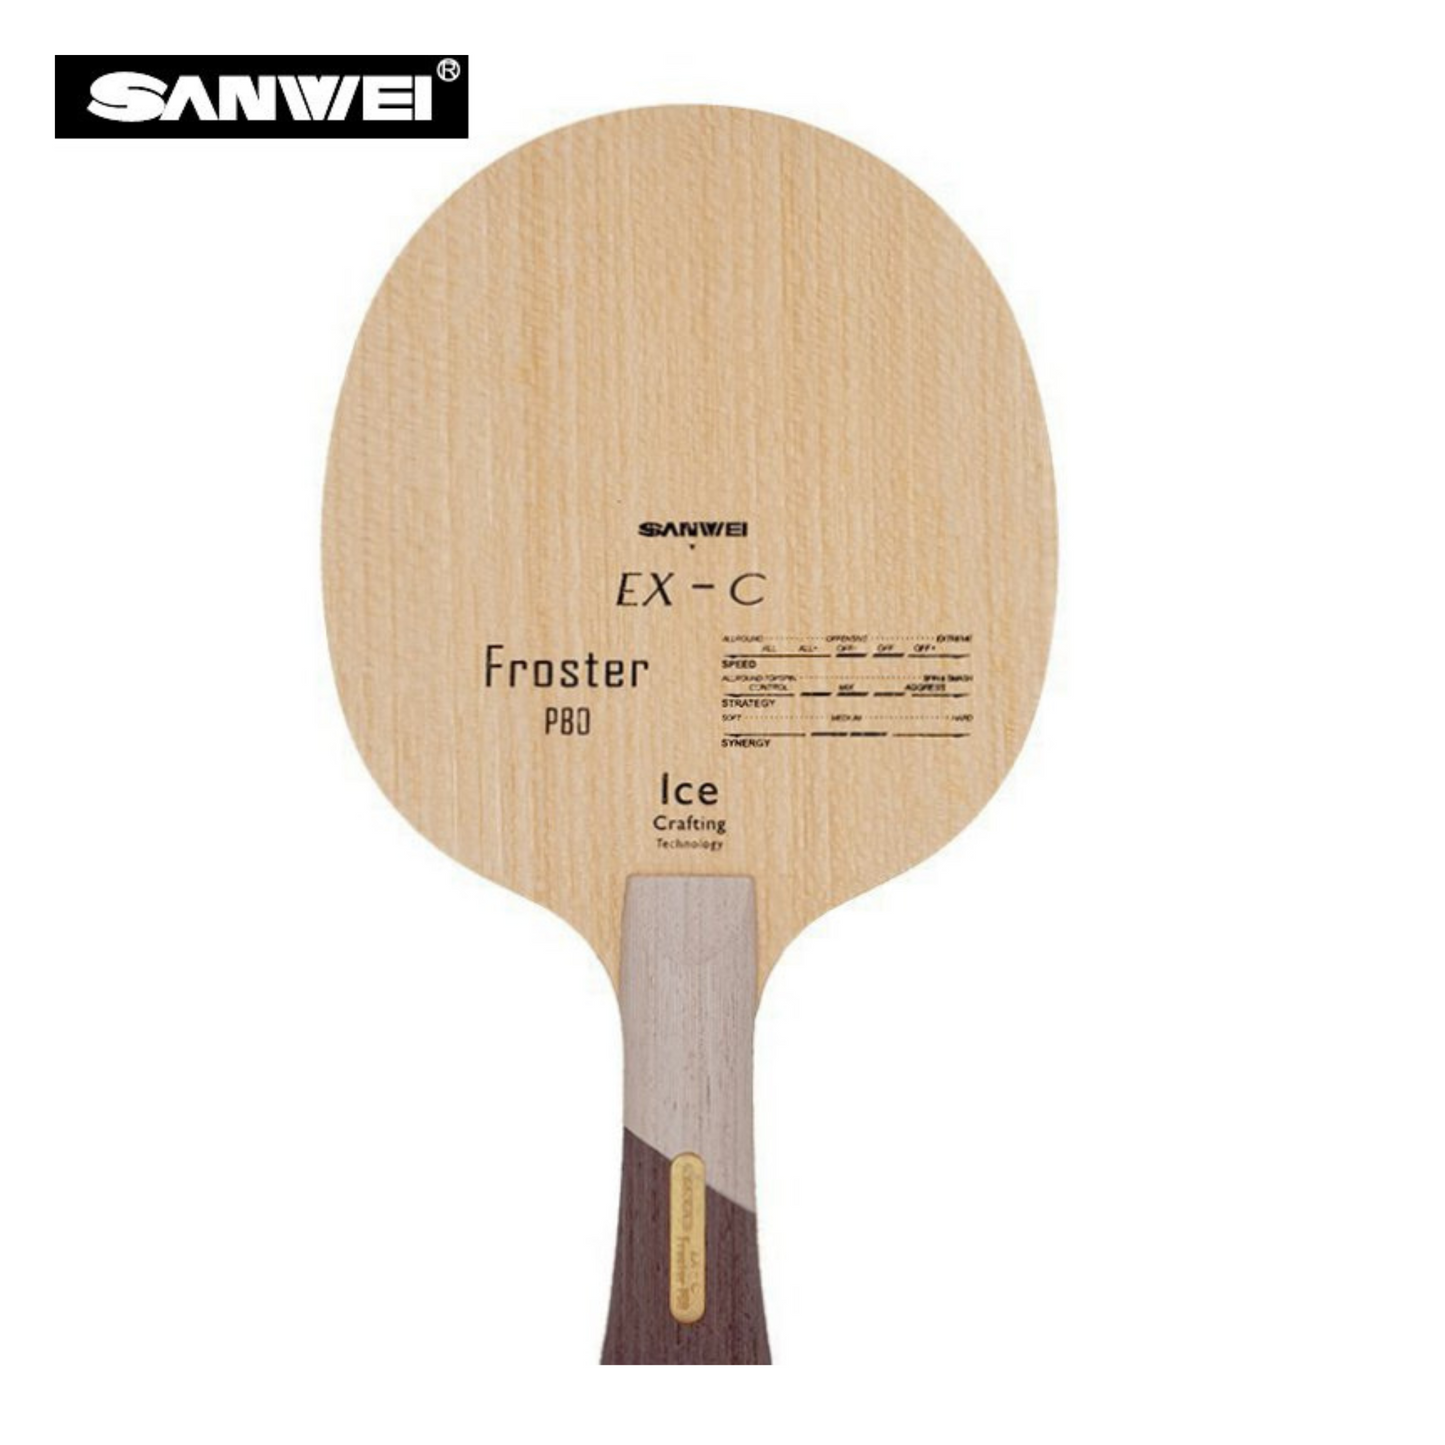 Sanwei Froster PBO EX-C